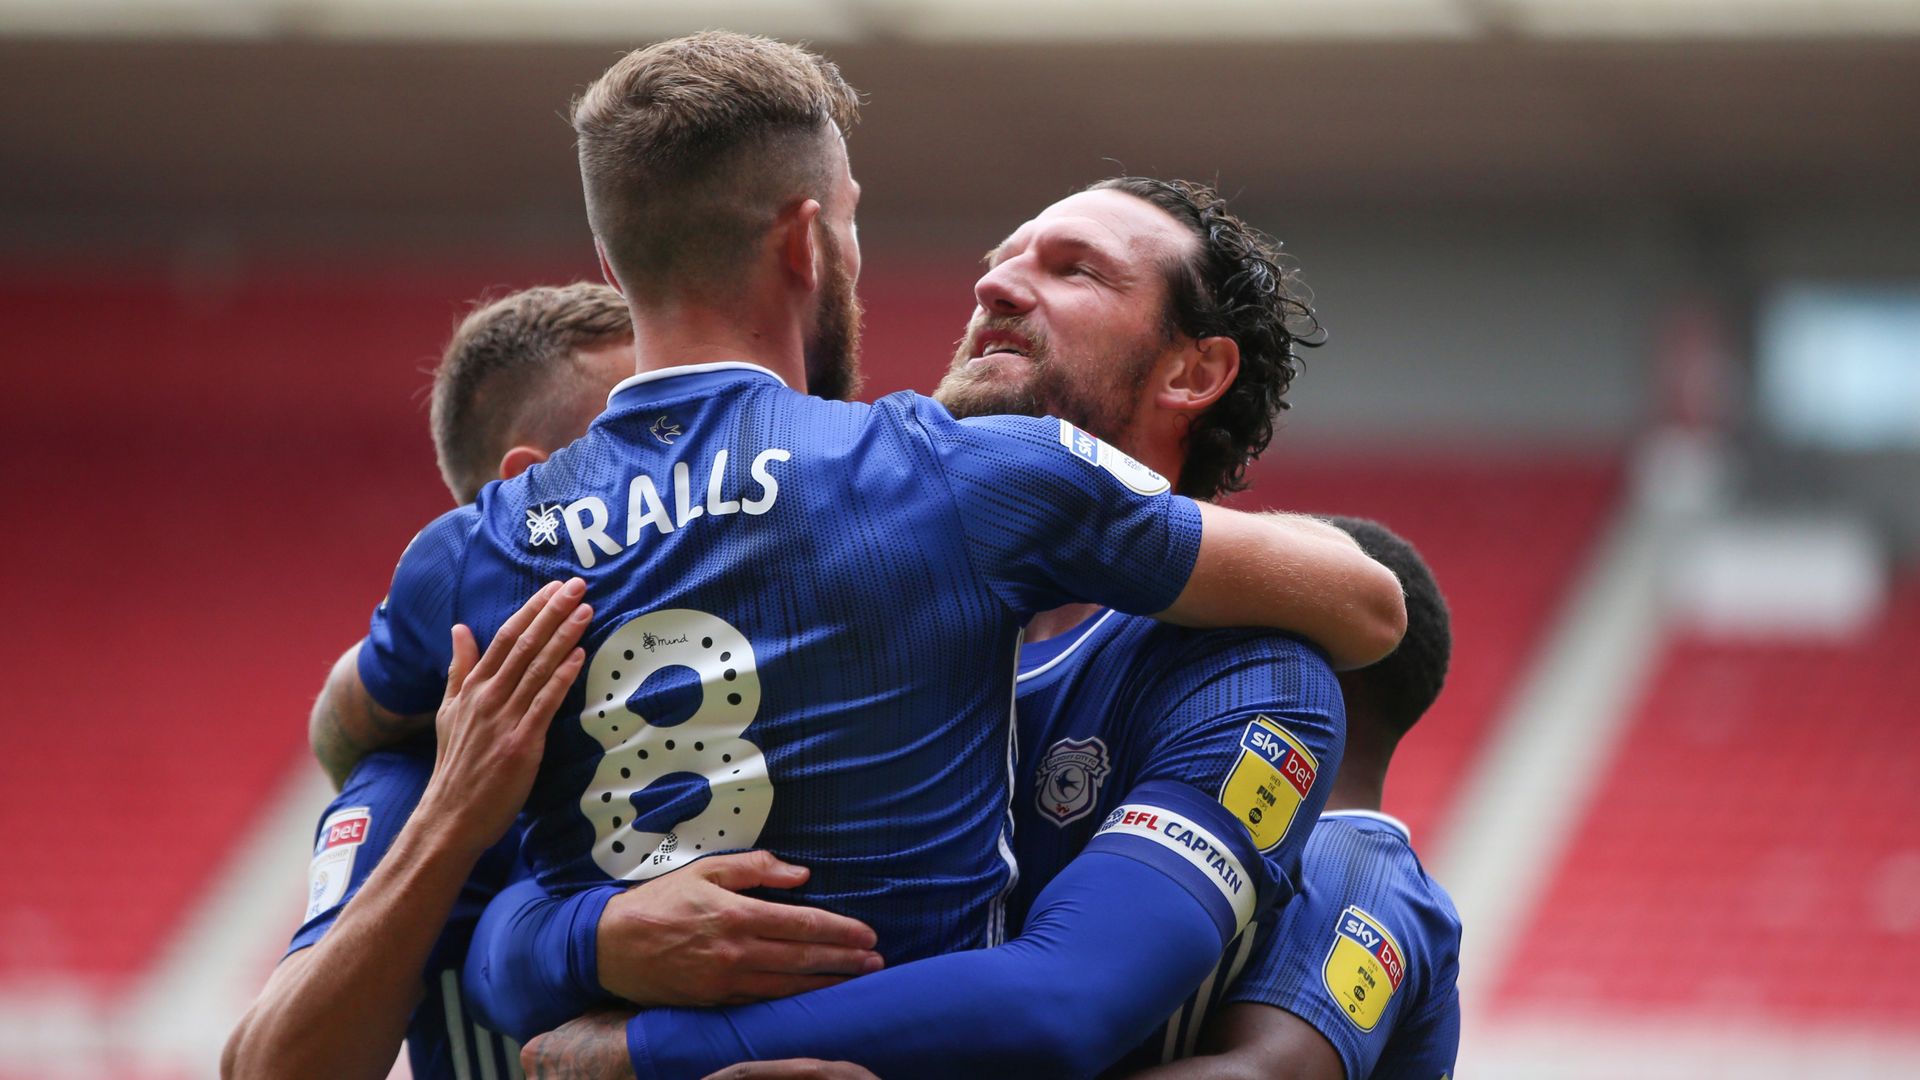 Cardiff close on play-off spot